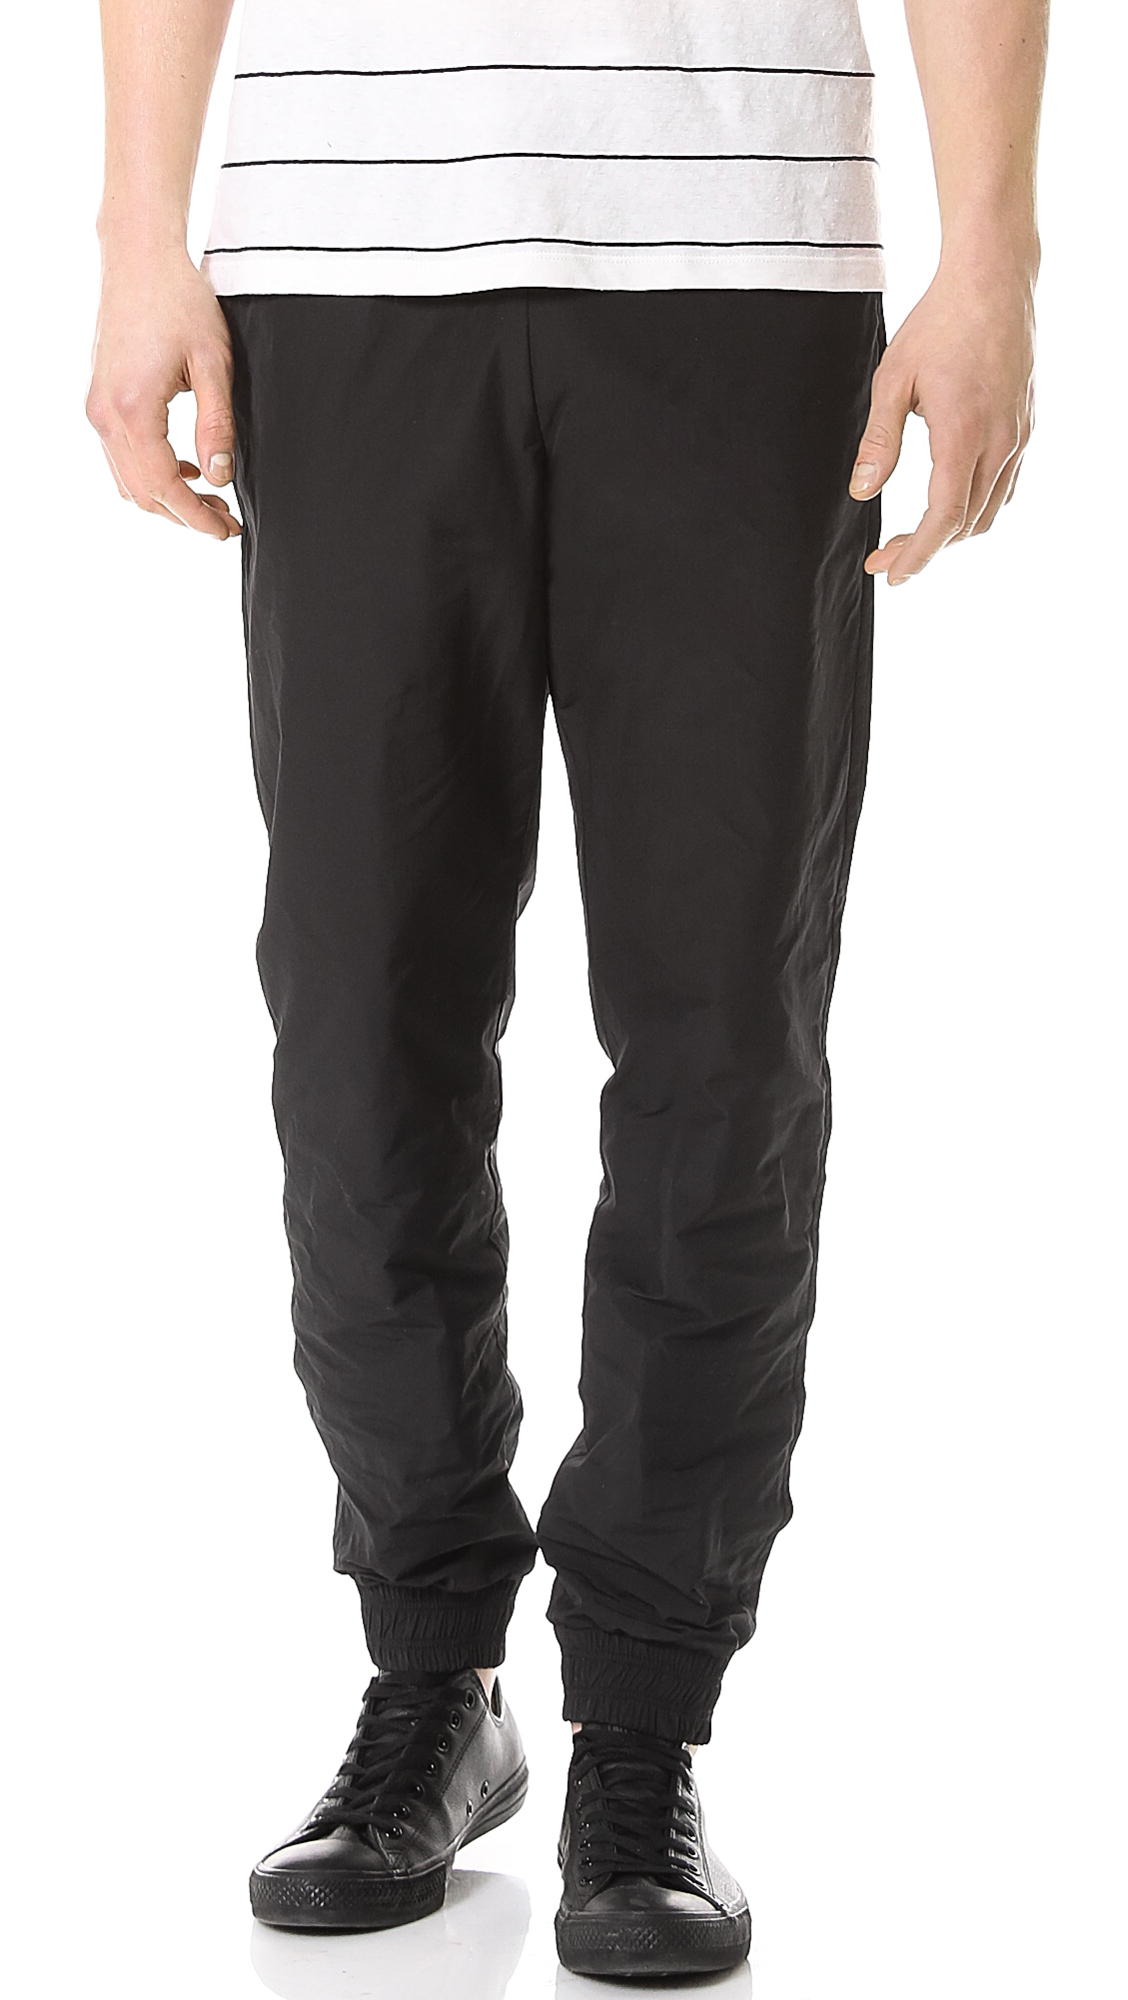 Lyst - T By Alexander Wang Lightweight Nylon Track Pants in Black for Men